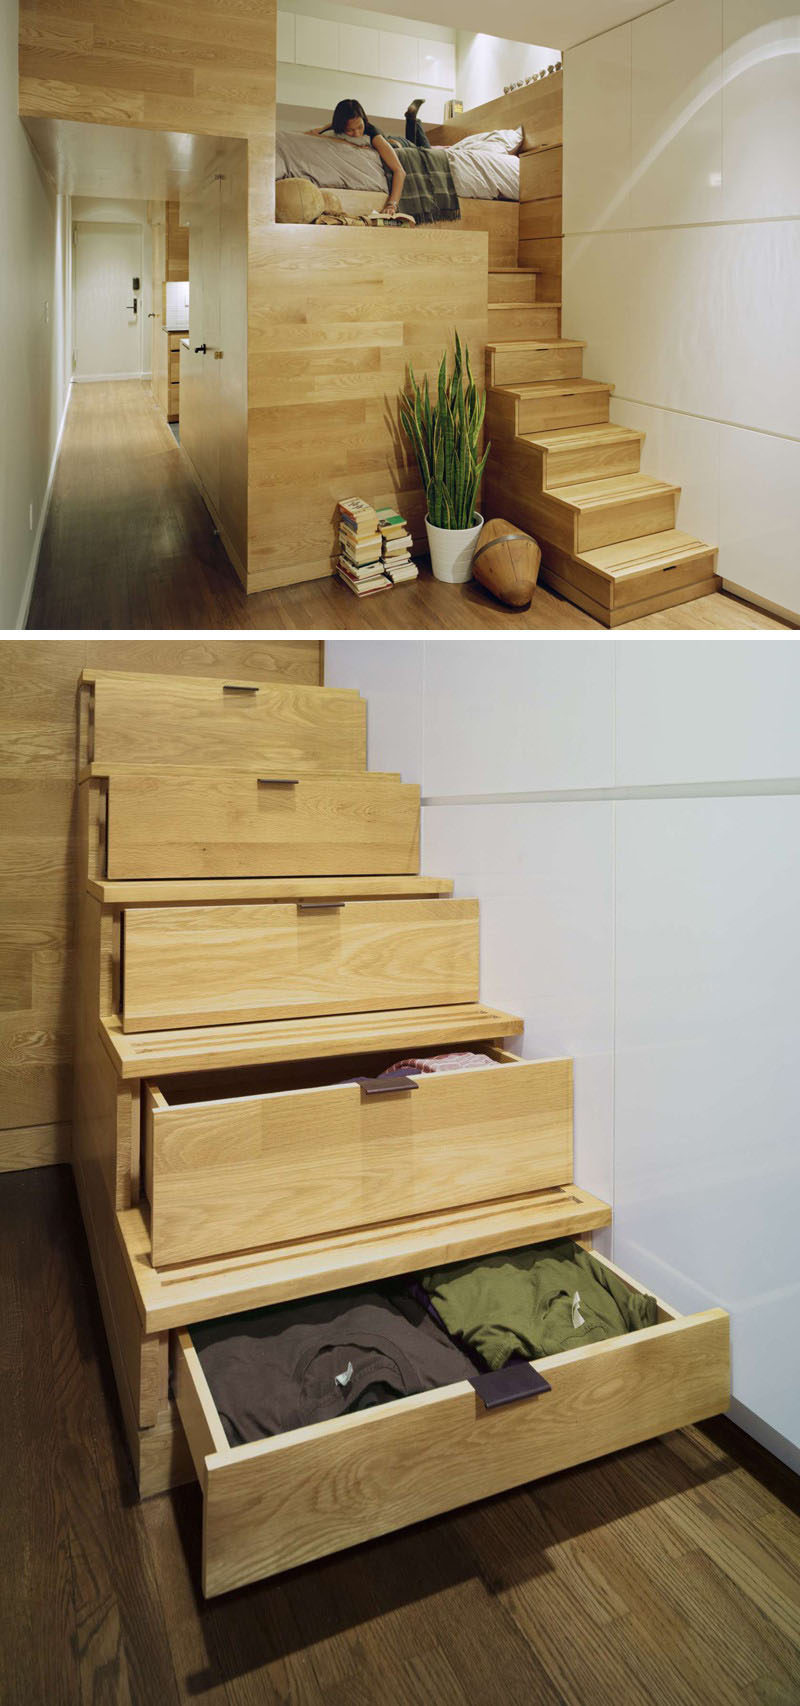 13 Stair Design Ideas For Small Spaces // The staircase leading to the loft bed in this apartment also doubles as clothing storage, taking care of two problems with one staircase.